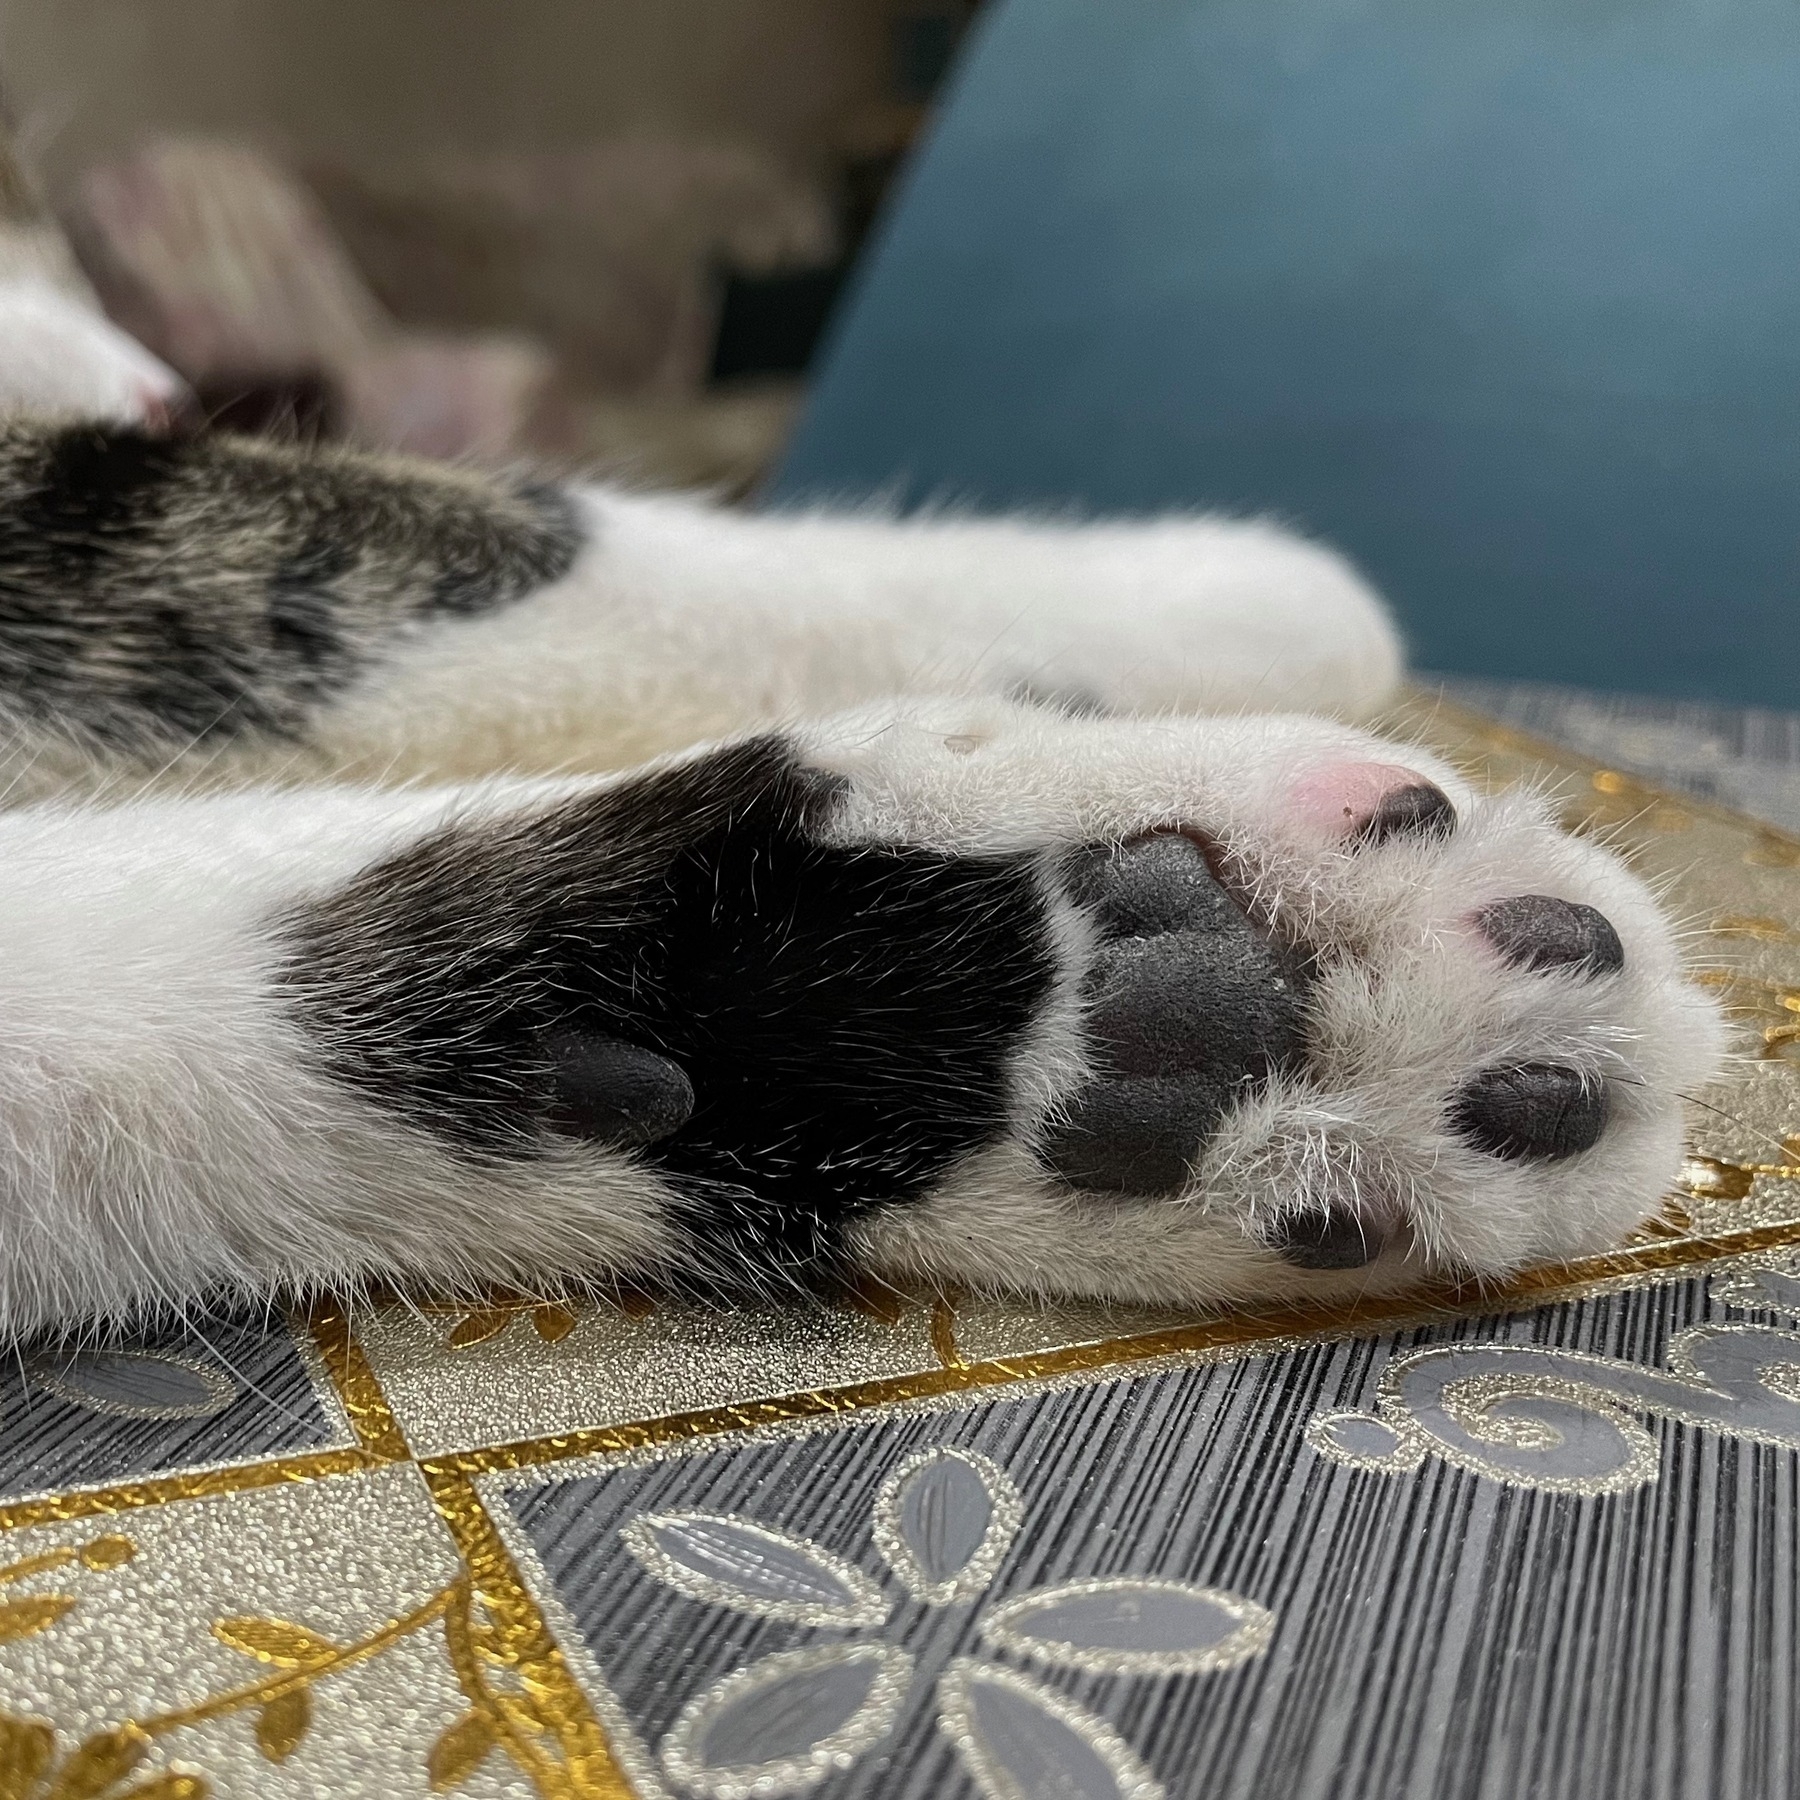 the underside of a cat's paw showing black "beans"